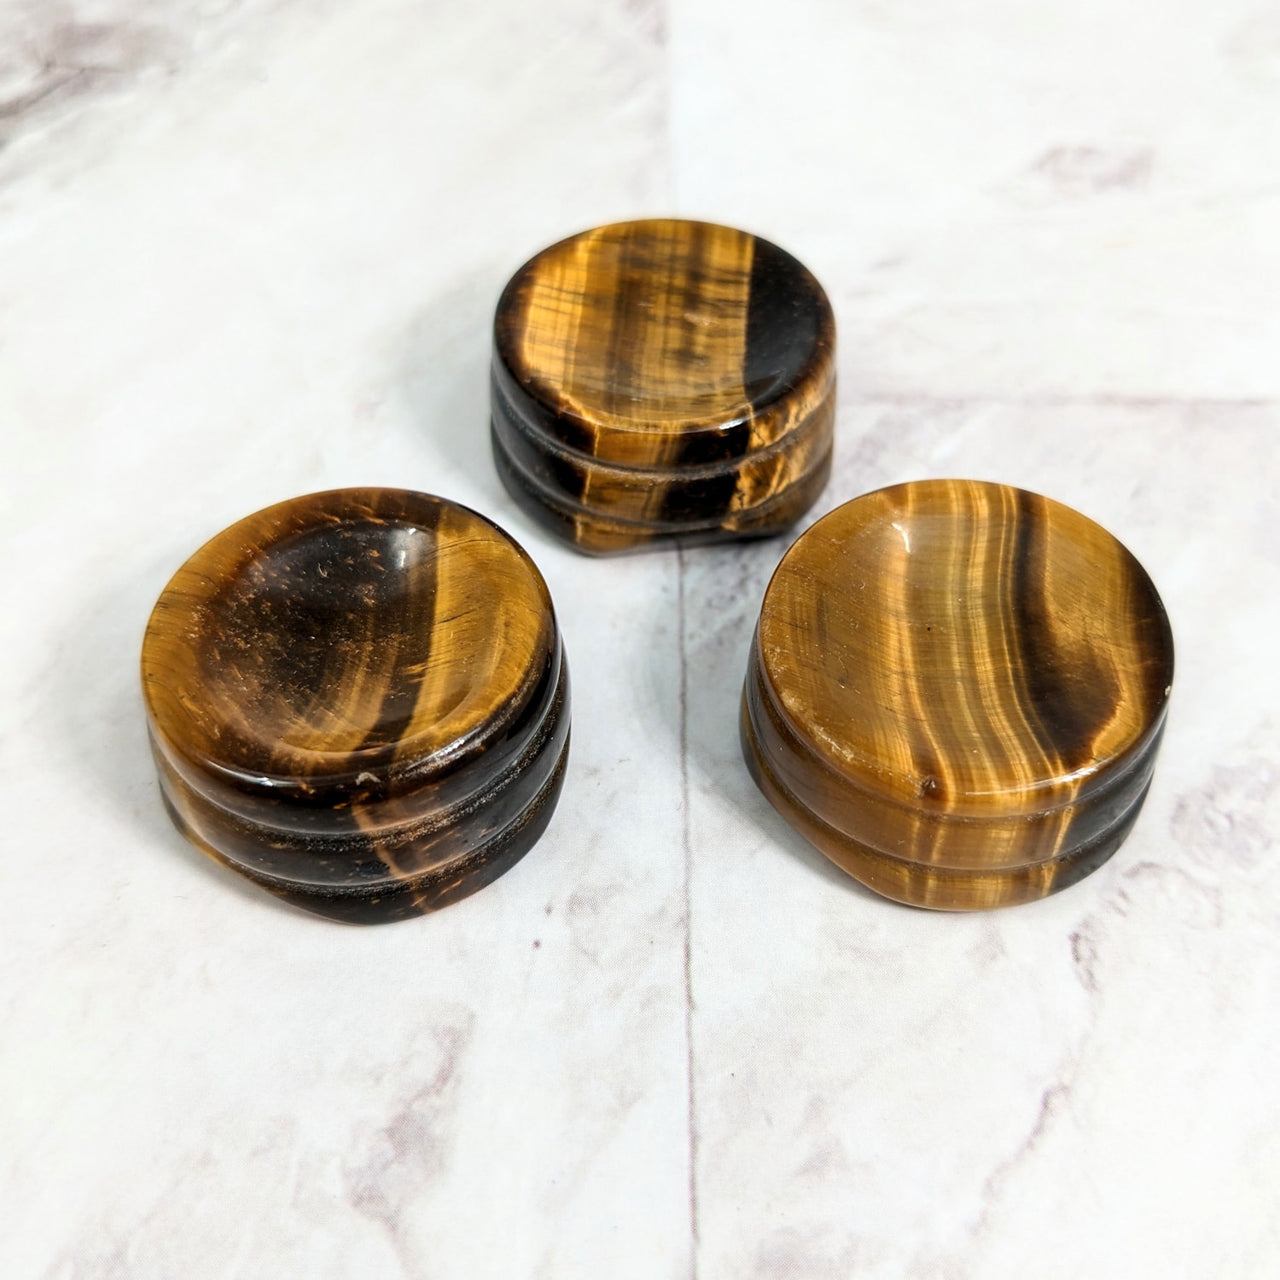 Gold Tiger’s Eye 1’ Sphere Holder LV2330: Three Wooden Grinds on Marble Surface